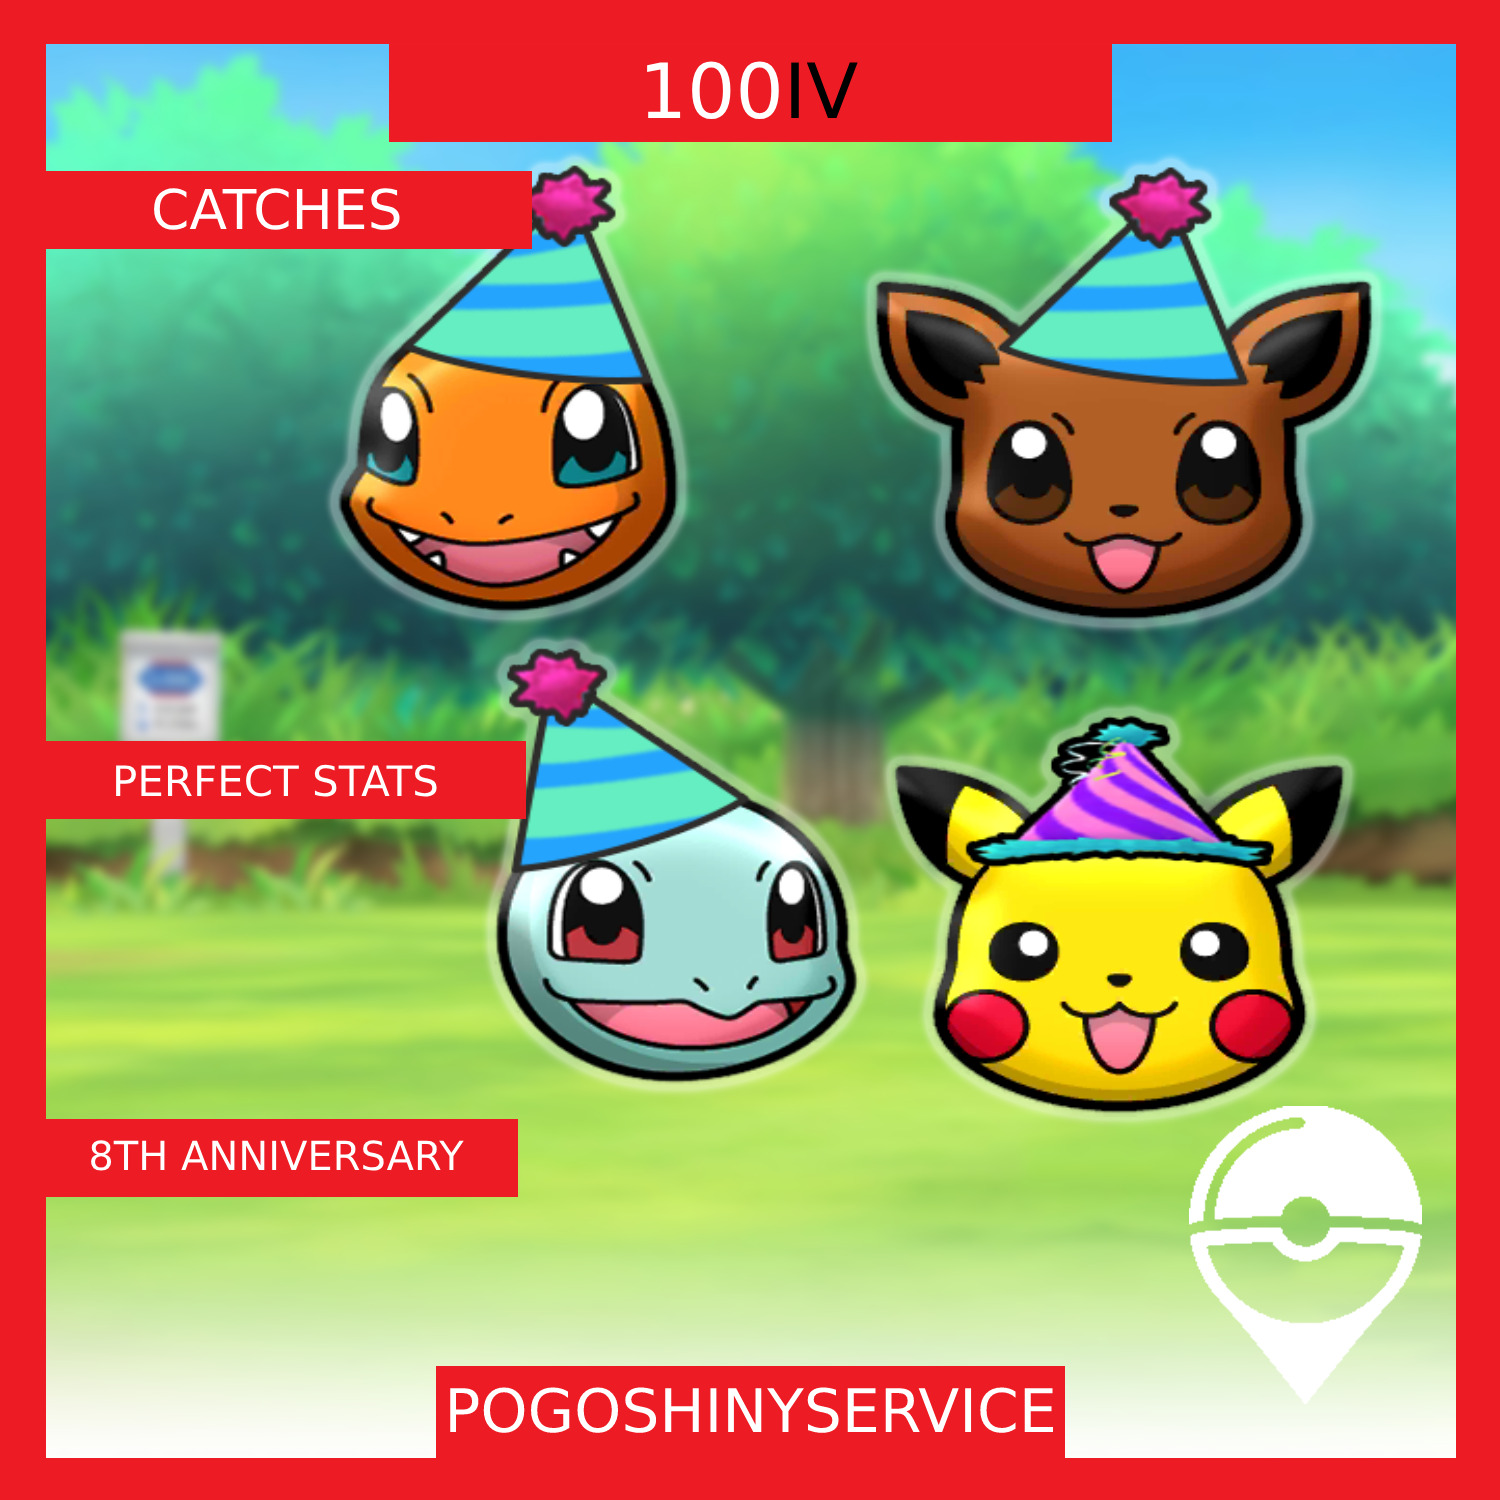 Pokemon - 8th Anniversary Party - 100IV Catches - Eevee, Charmander & more - GO